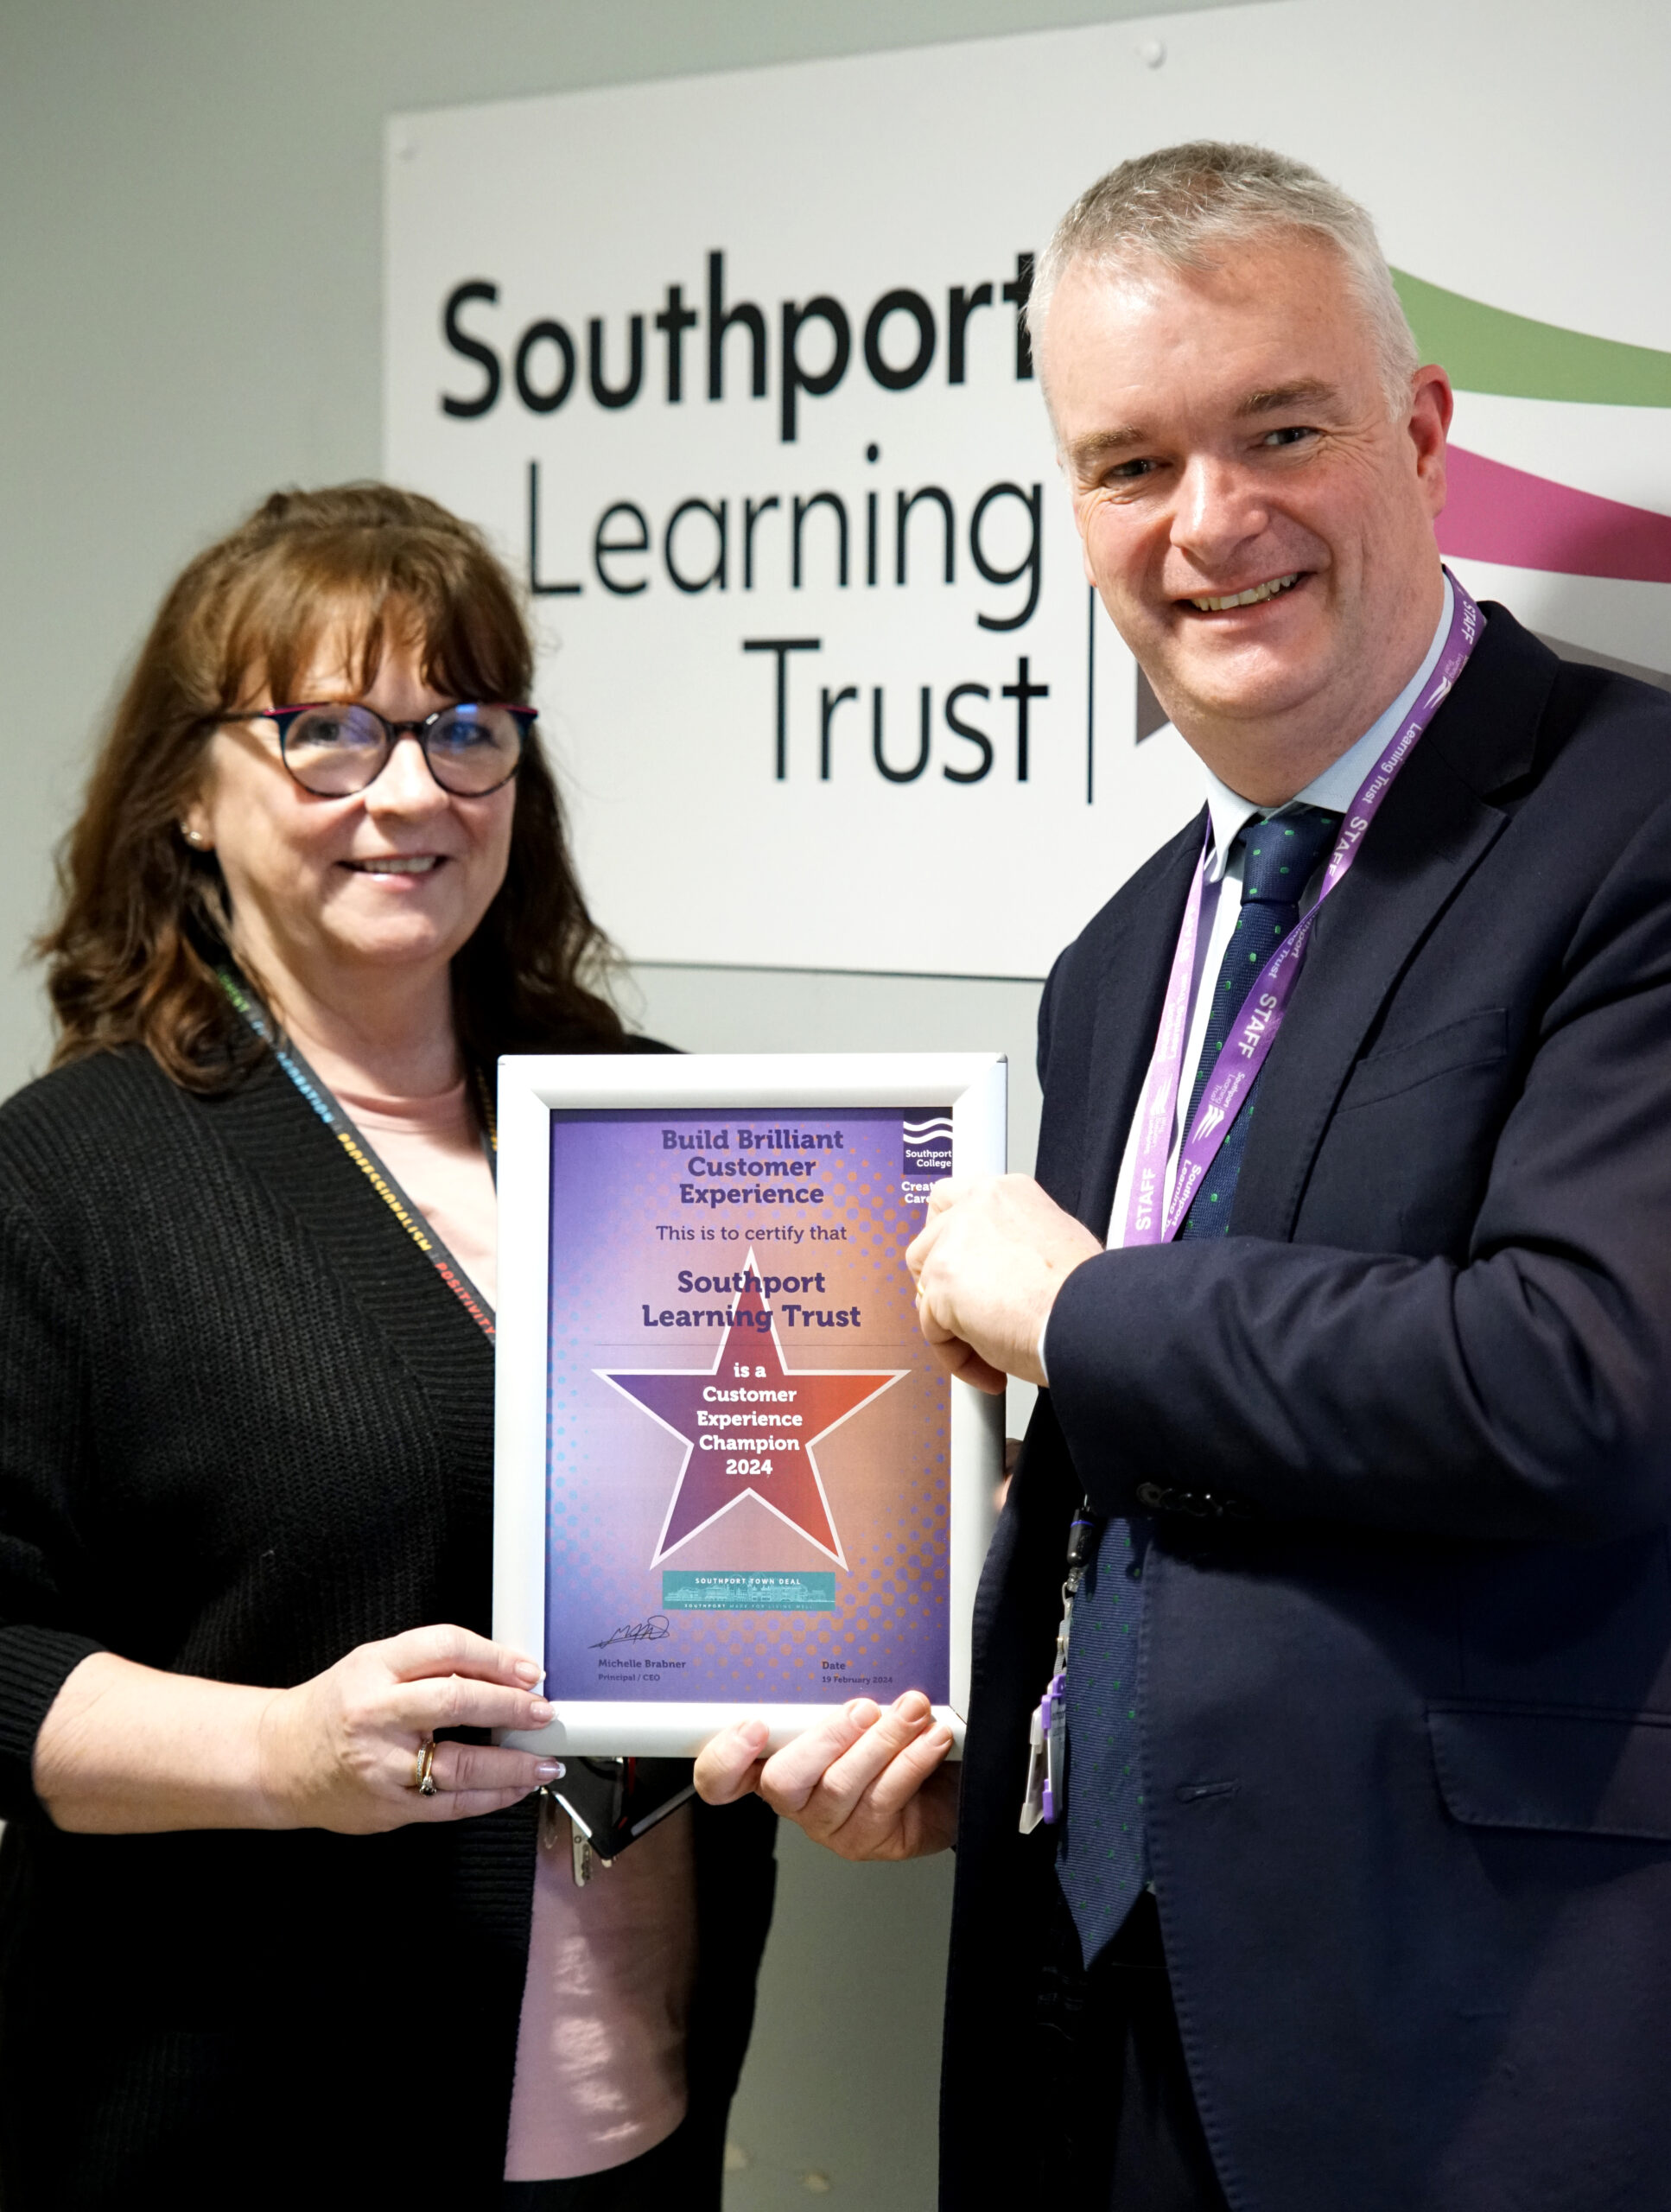 Southport College has launched an exciting new customer service initiative in partnership with the Town Deal and is inviting local employers to join in. Southport Learning Trust receives its certificate